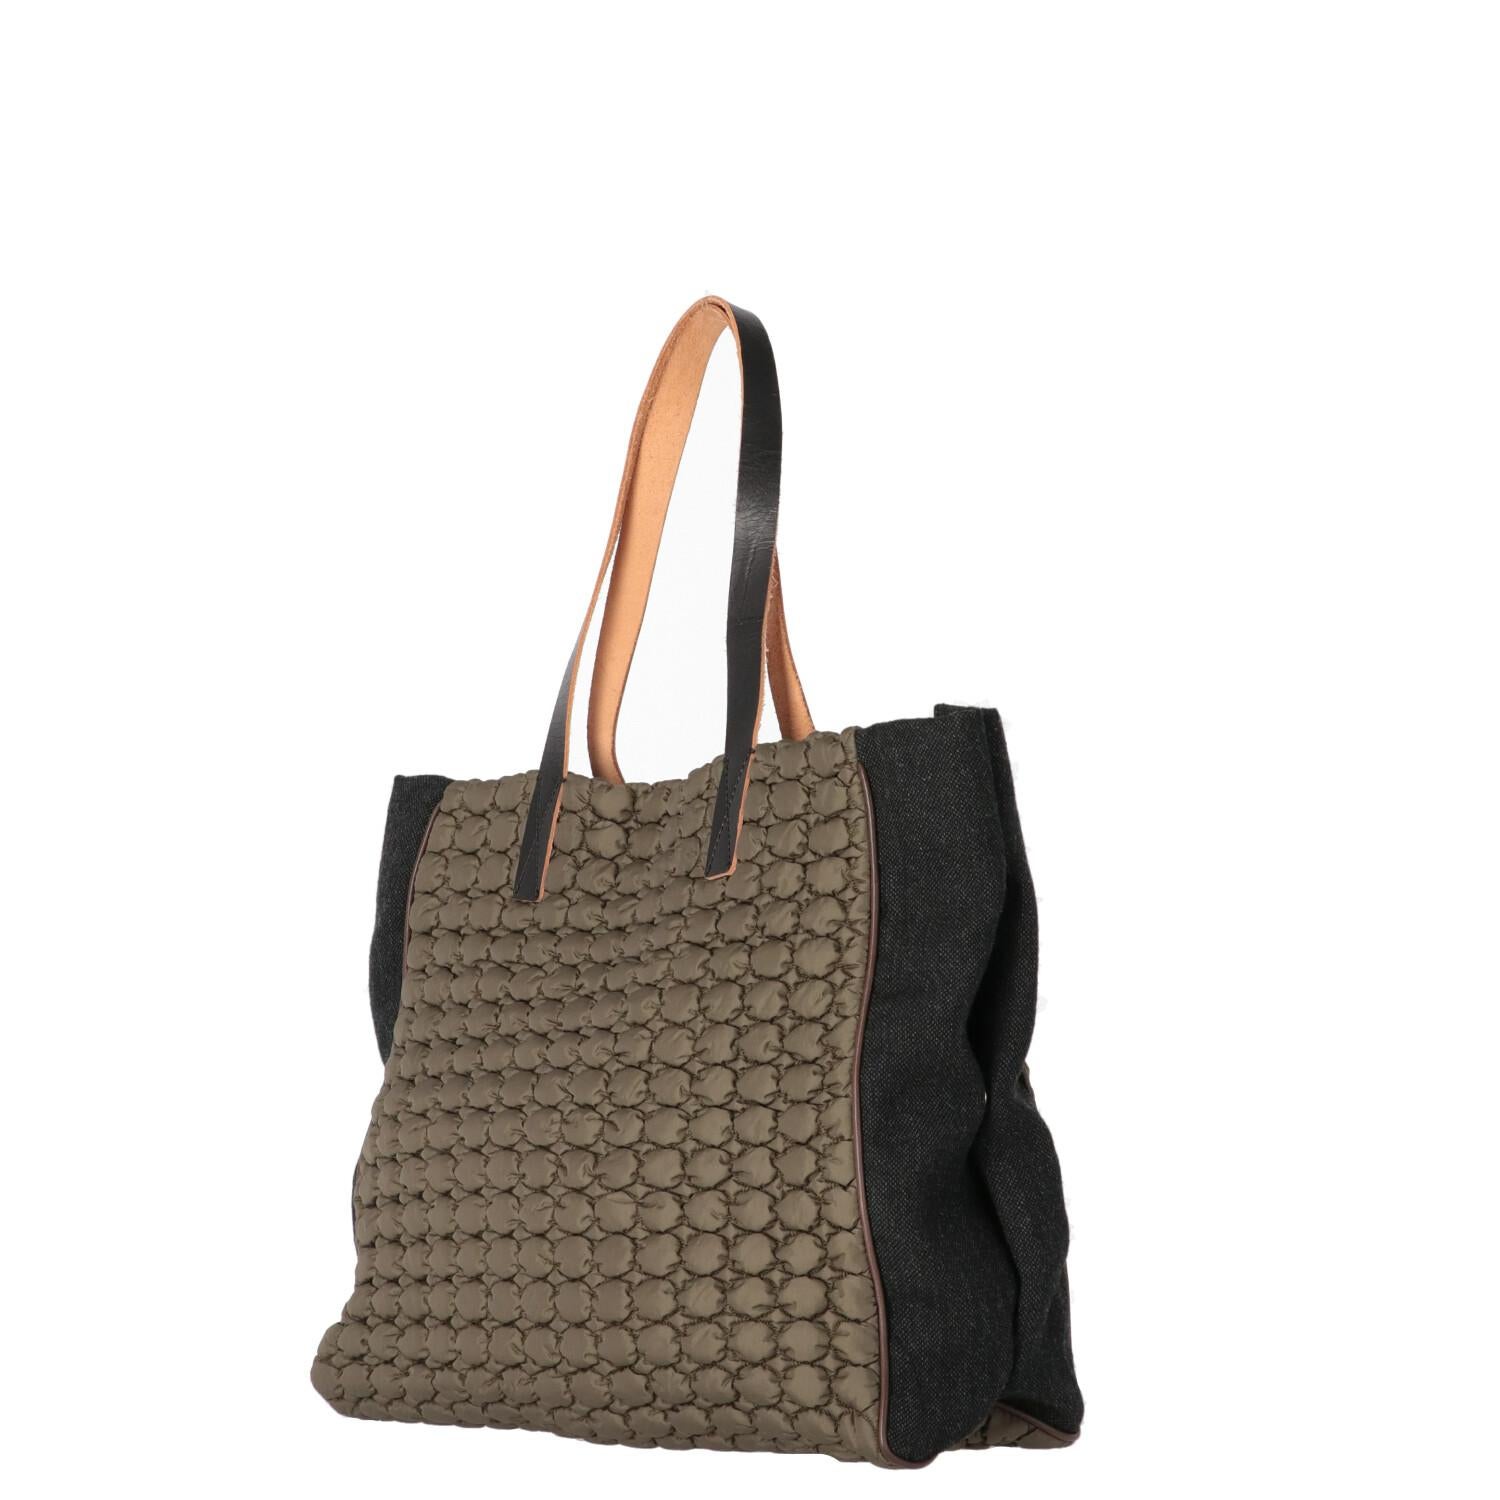 A.N.G.E.L.O. Vintage - ITALY
Marni military green quilted nylon tote bag with dark gray wool blend fabric sides and snap buttons. Model with double leather handles, magnetic closure and internal pockets.
Years: Winter 2011

Made in Italy

Flat